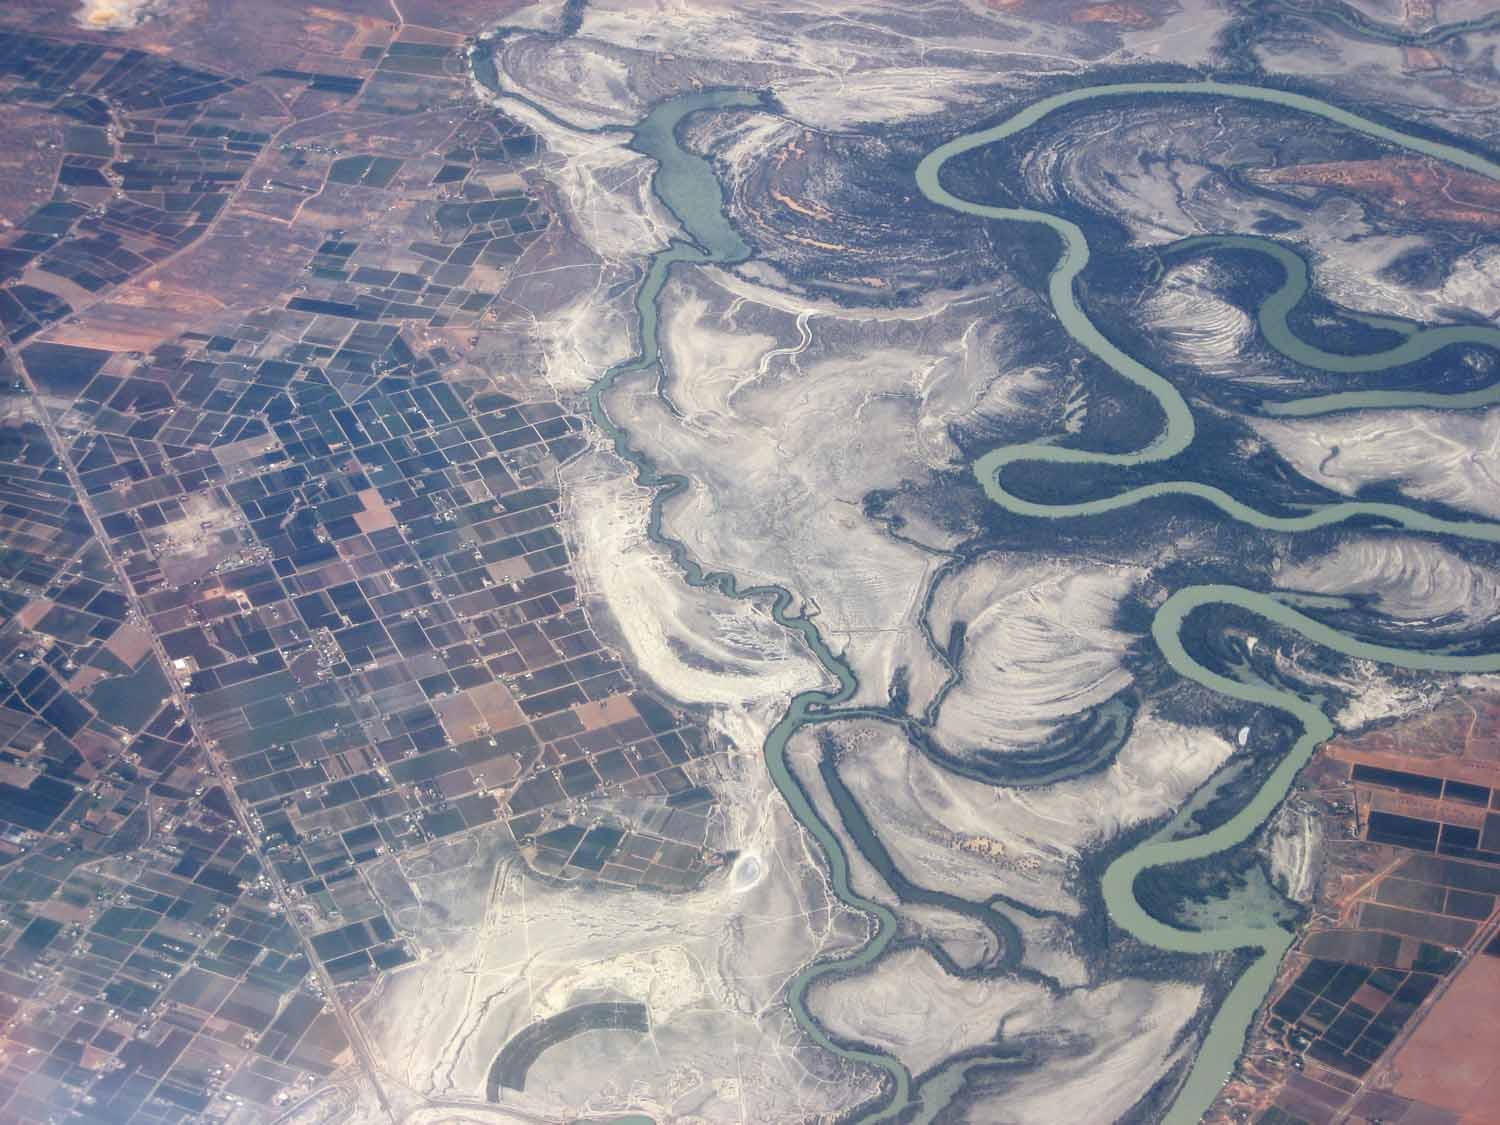 Meandering Murray River in South Australia (or maybe Victoria)